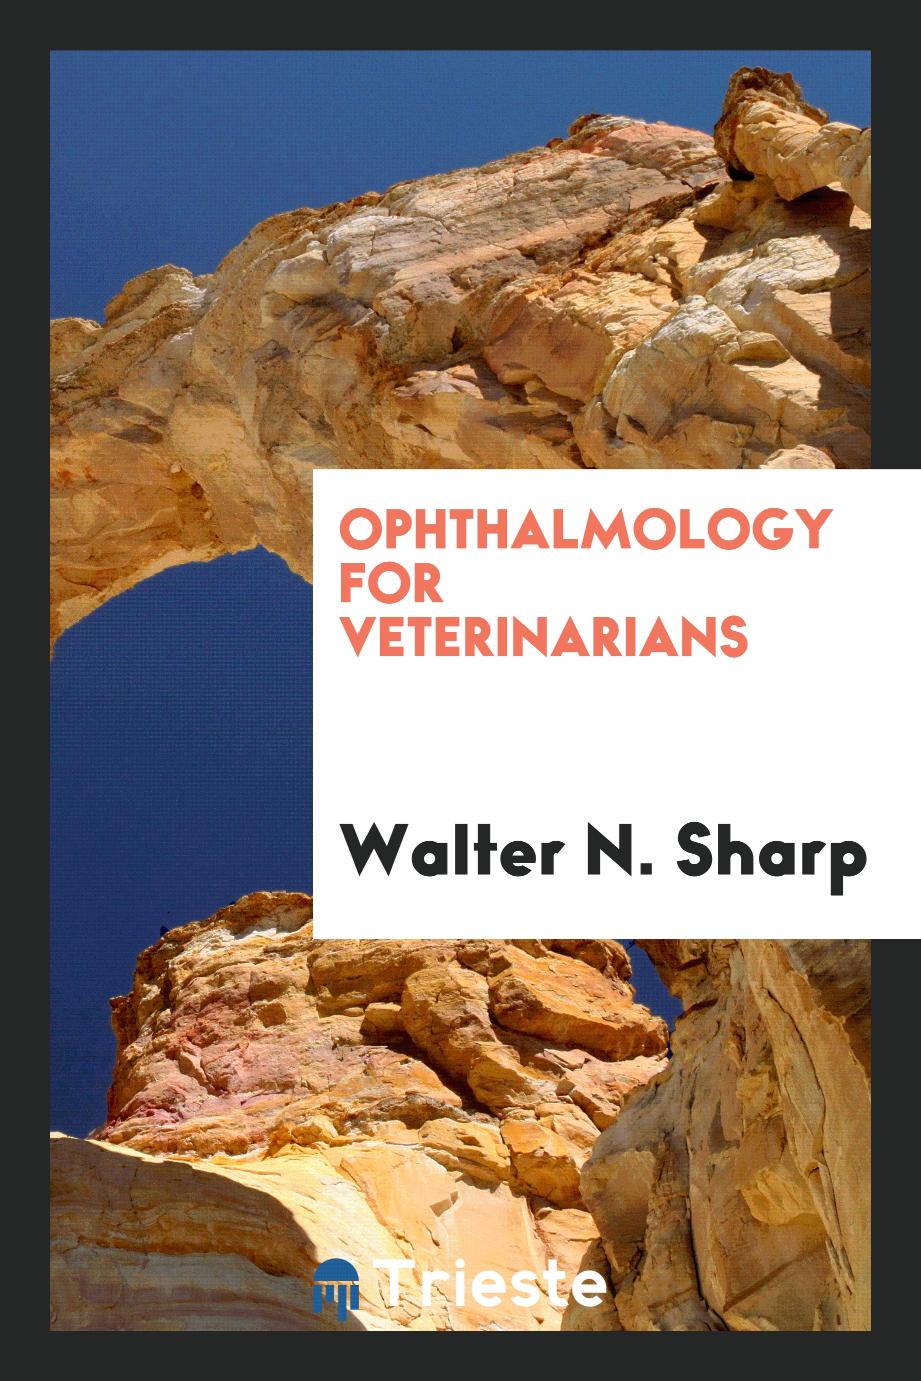 Ophthalmology for veterinarians